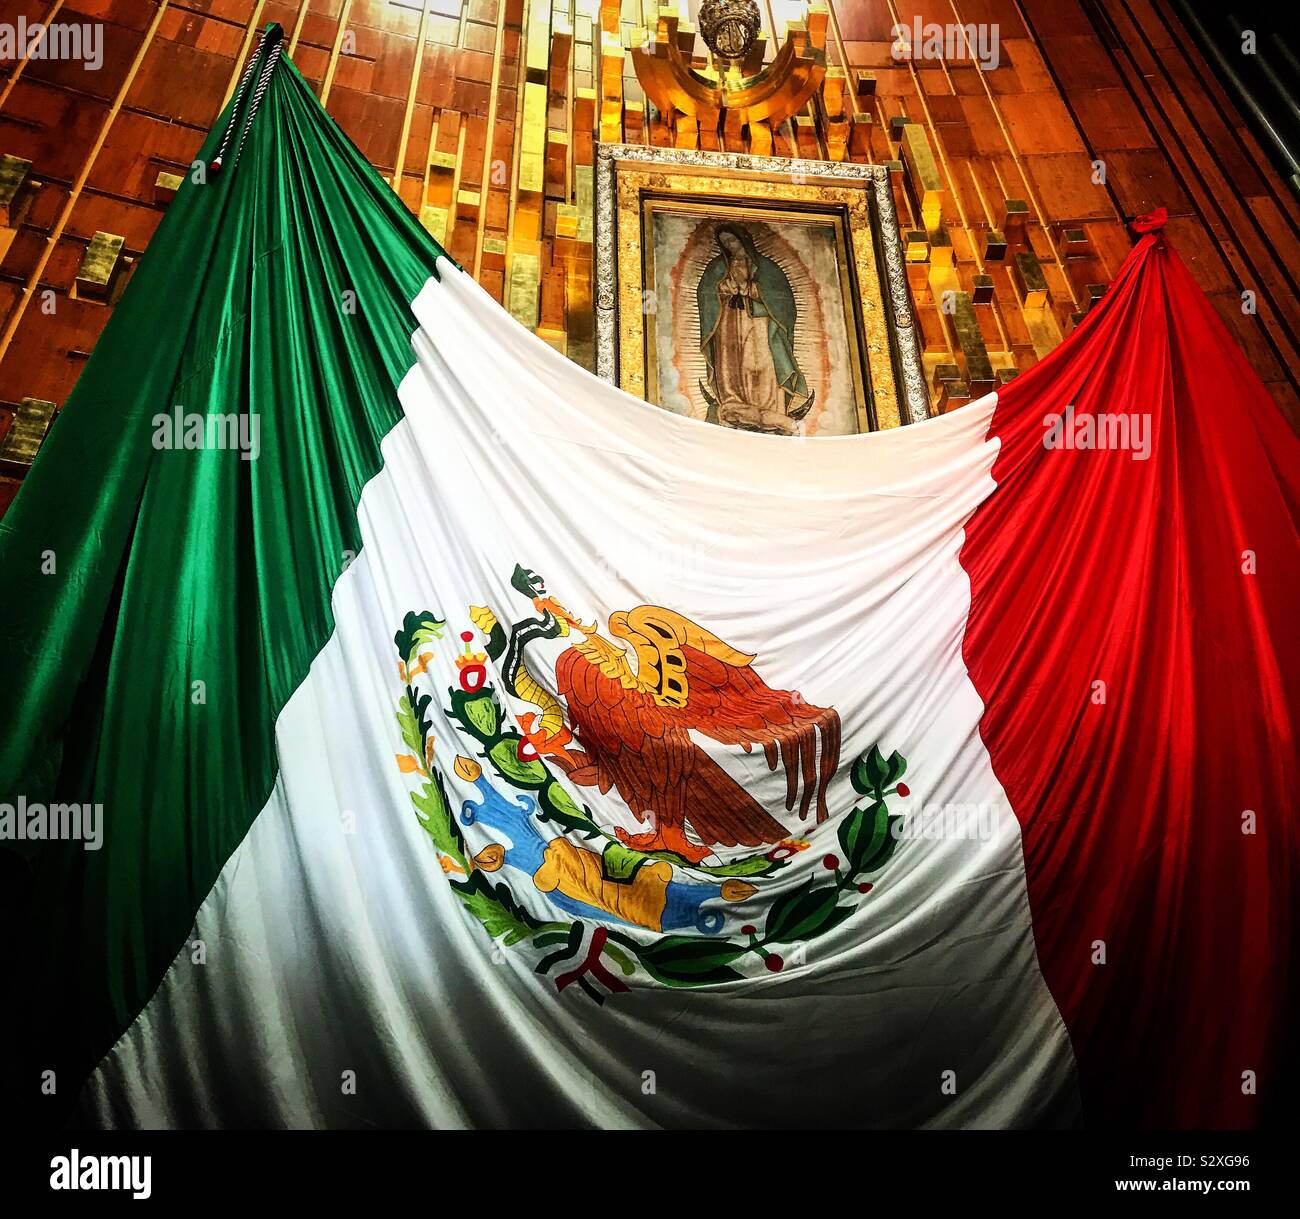 The Mexican flag decorates the altar of Our Lady of Guadalupe in Mexico City, Mexico. Stock Photo